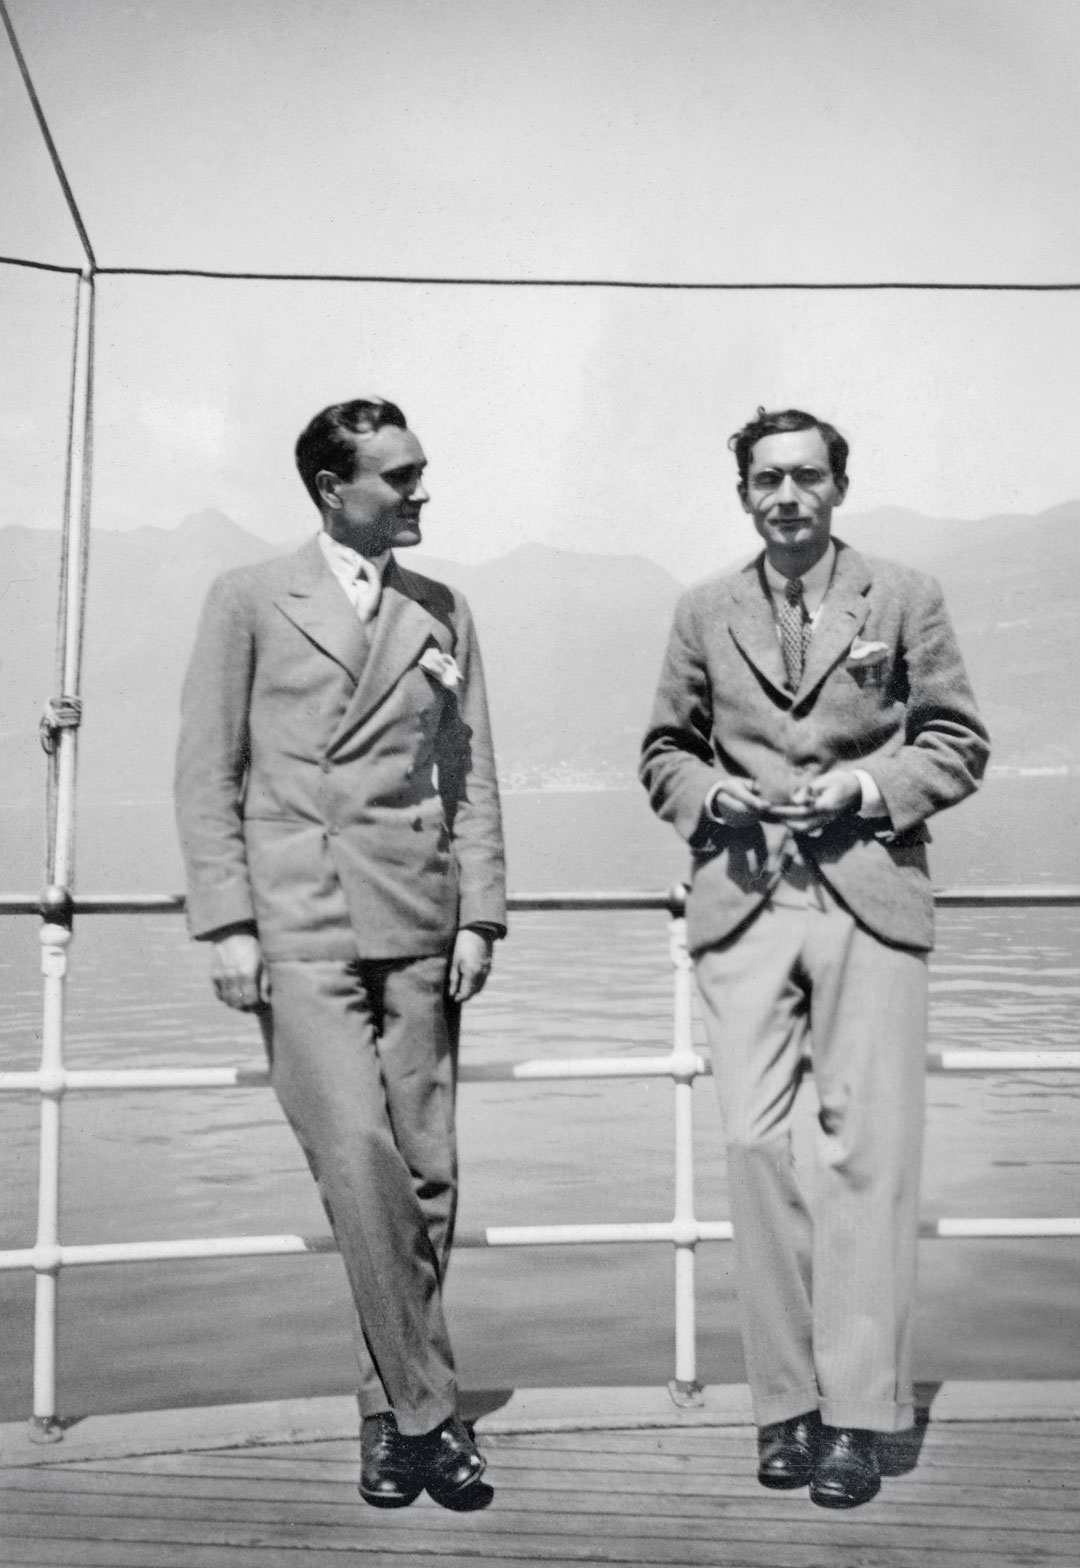 Philip Johnson (left) and Alfred H. Barr, Jr. (right), Lake Maggiore, Italy, April 1933. © 2019. Digital image, The Museum of Modern Art, New York/Scala, Florence